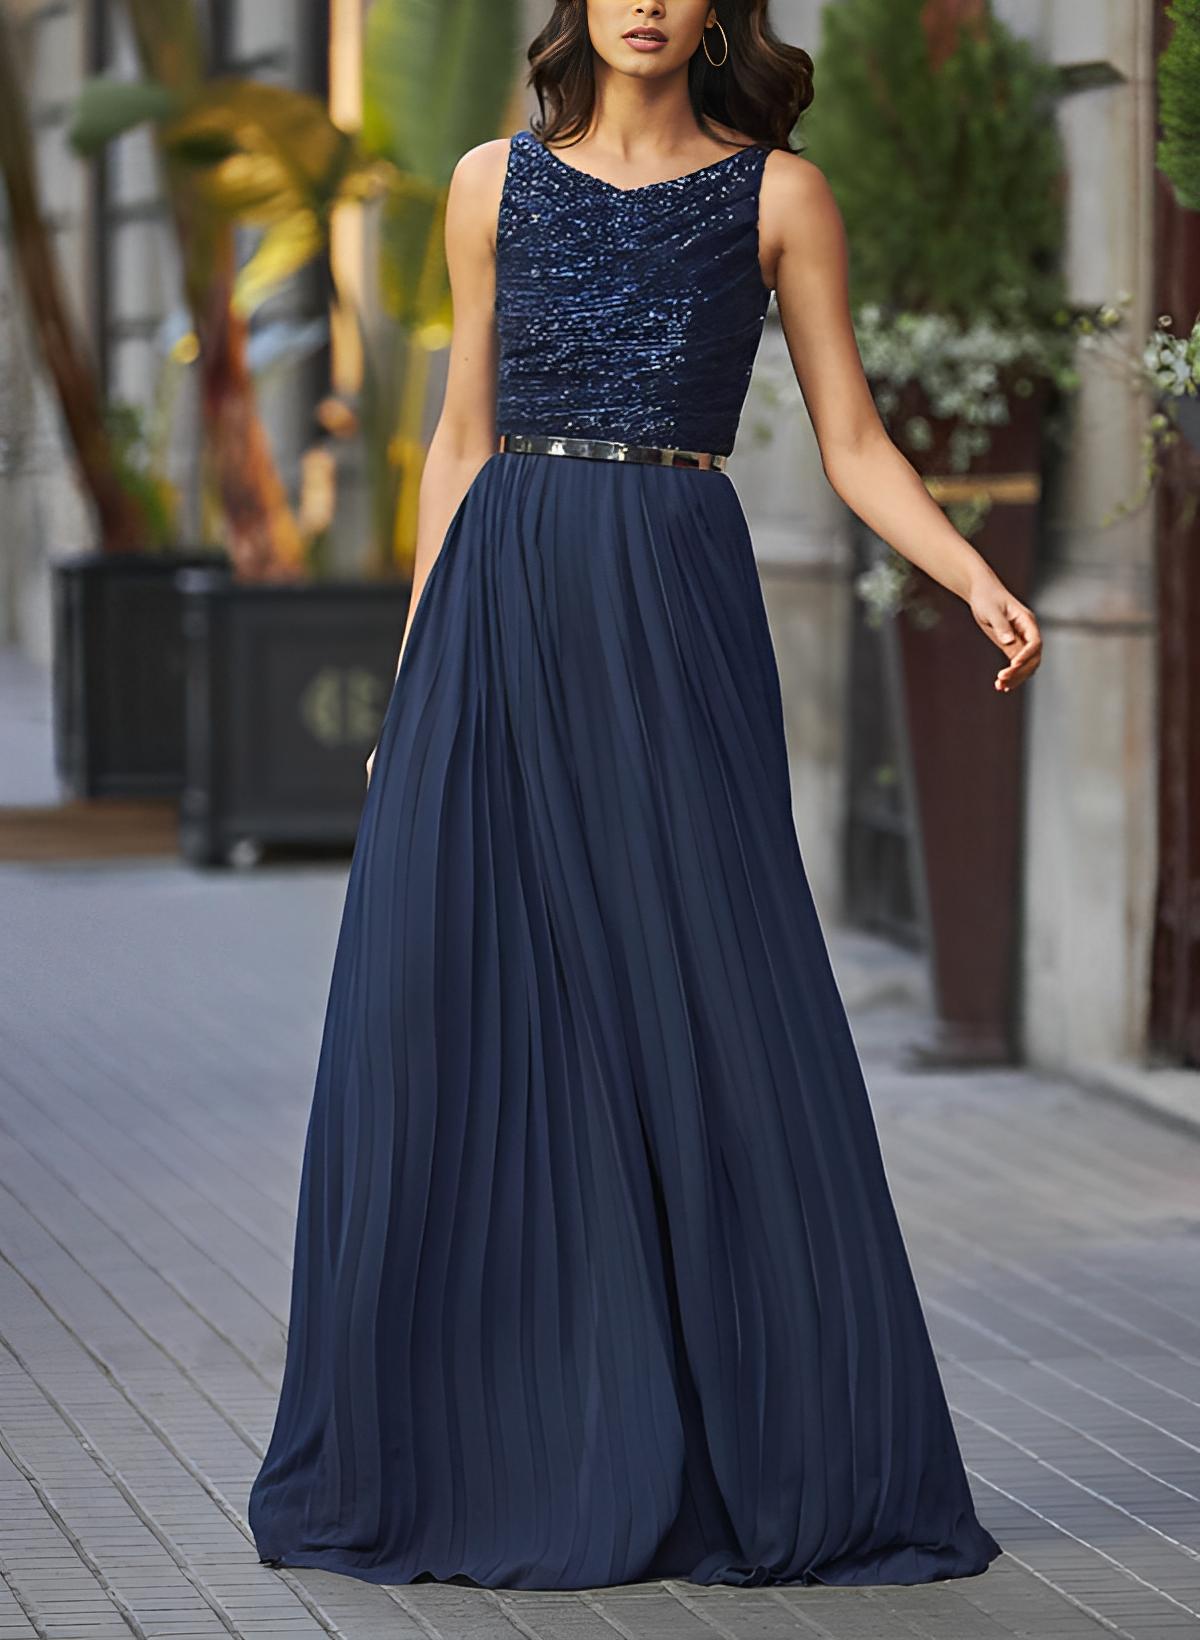 A-Line Sleeveless Floor-Length Mother Of The Bride Dresses Without Waistband